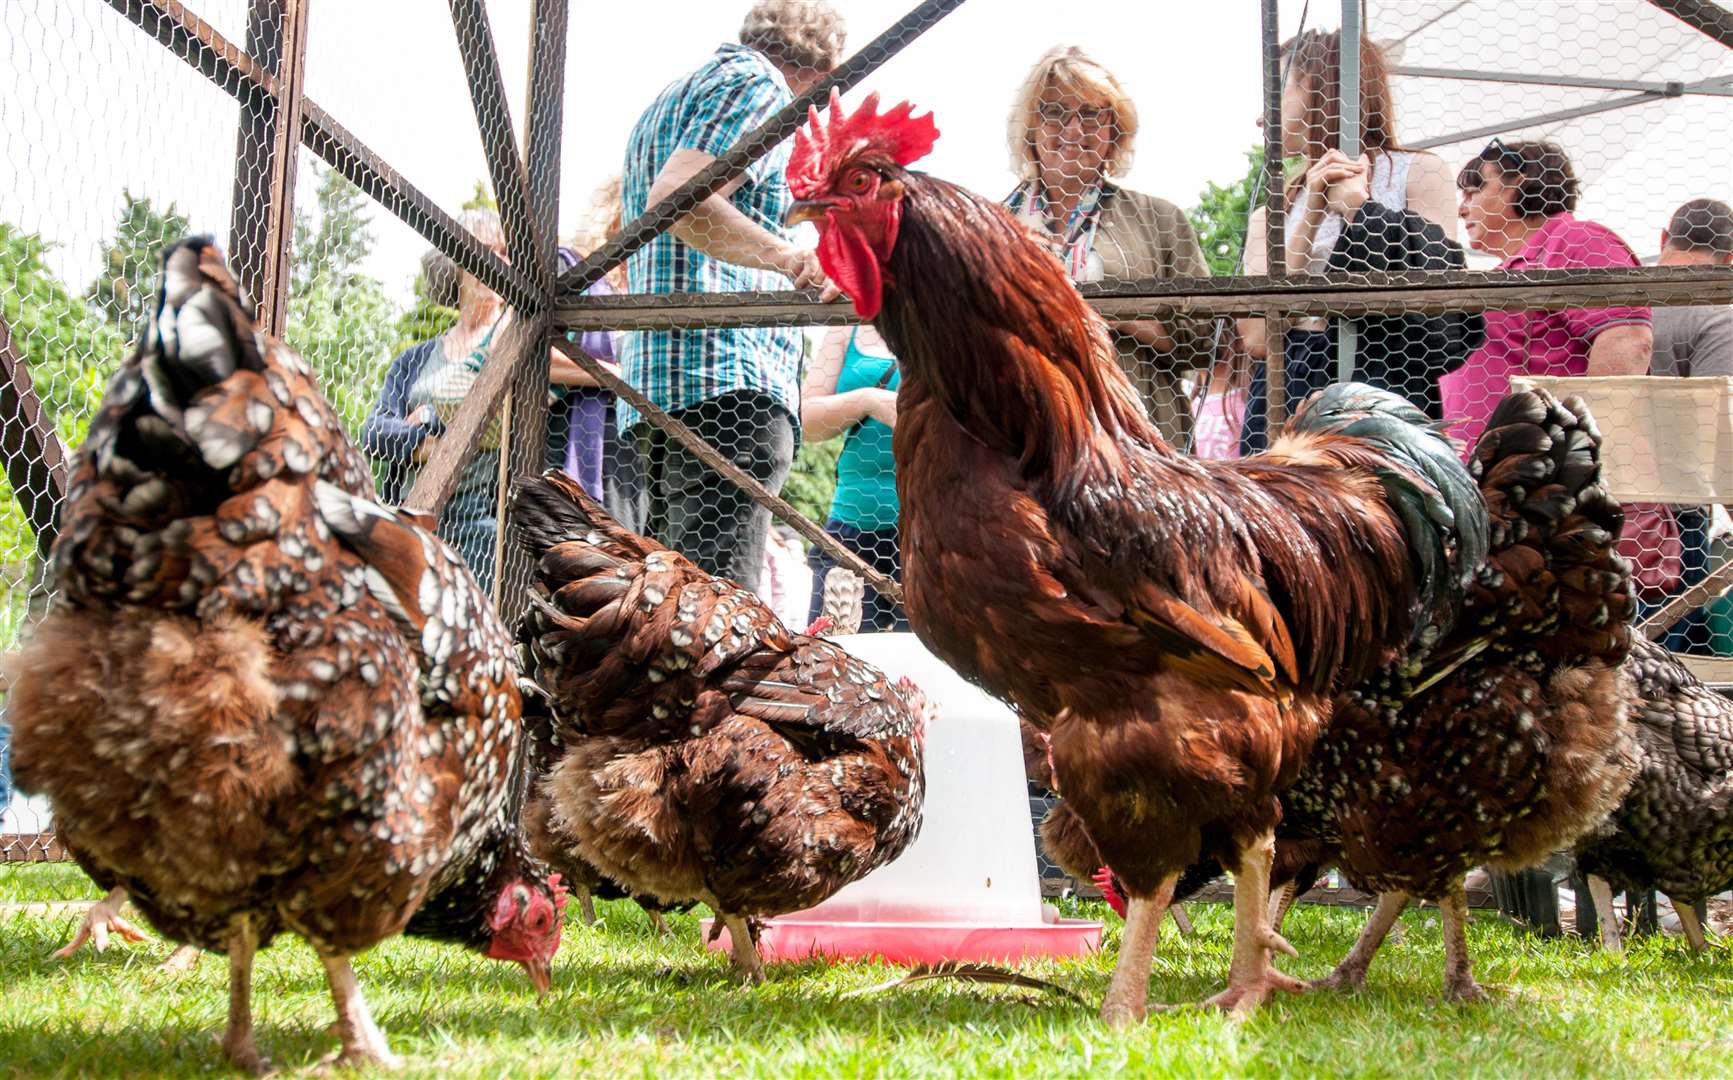 You'll be able to see hens at Great Comp Garden